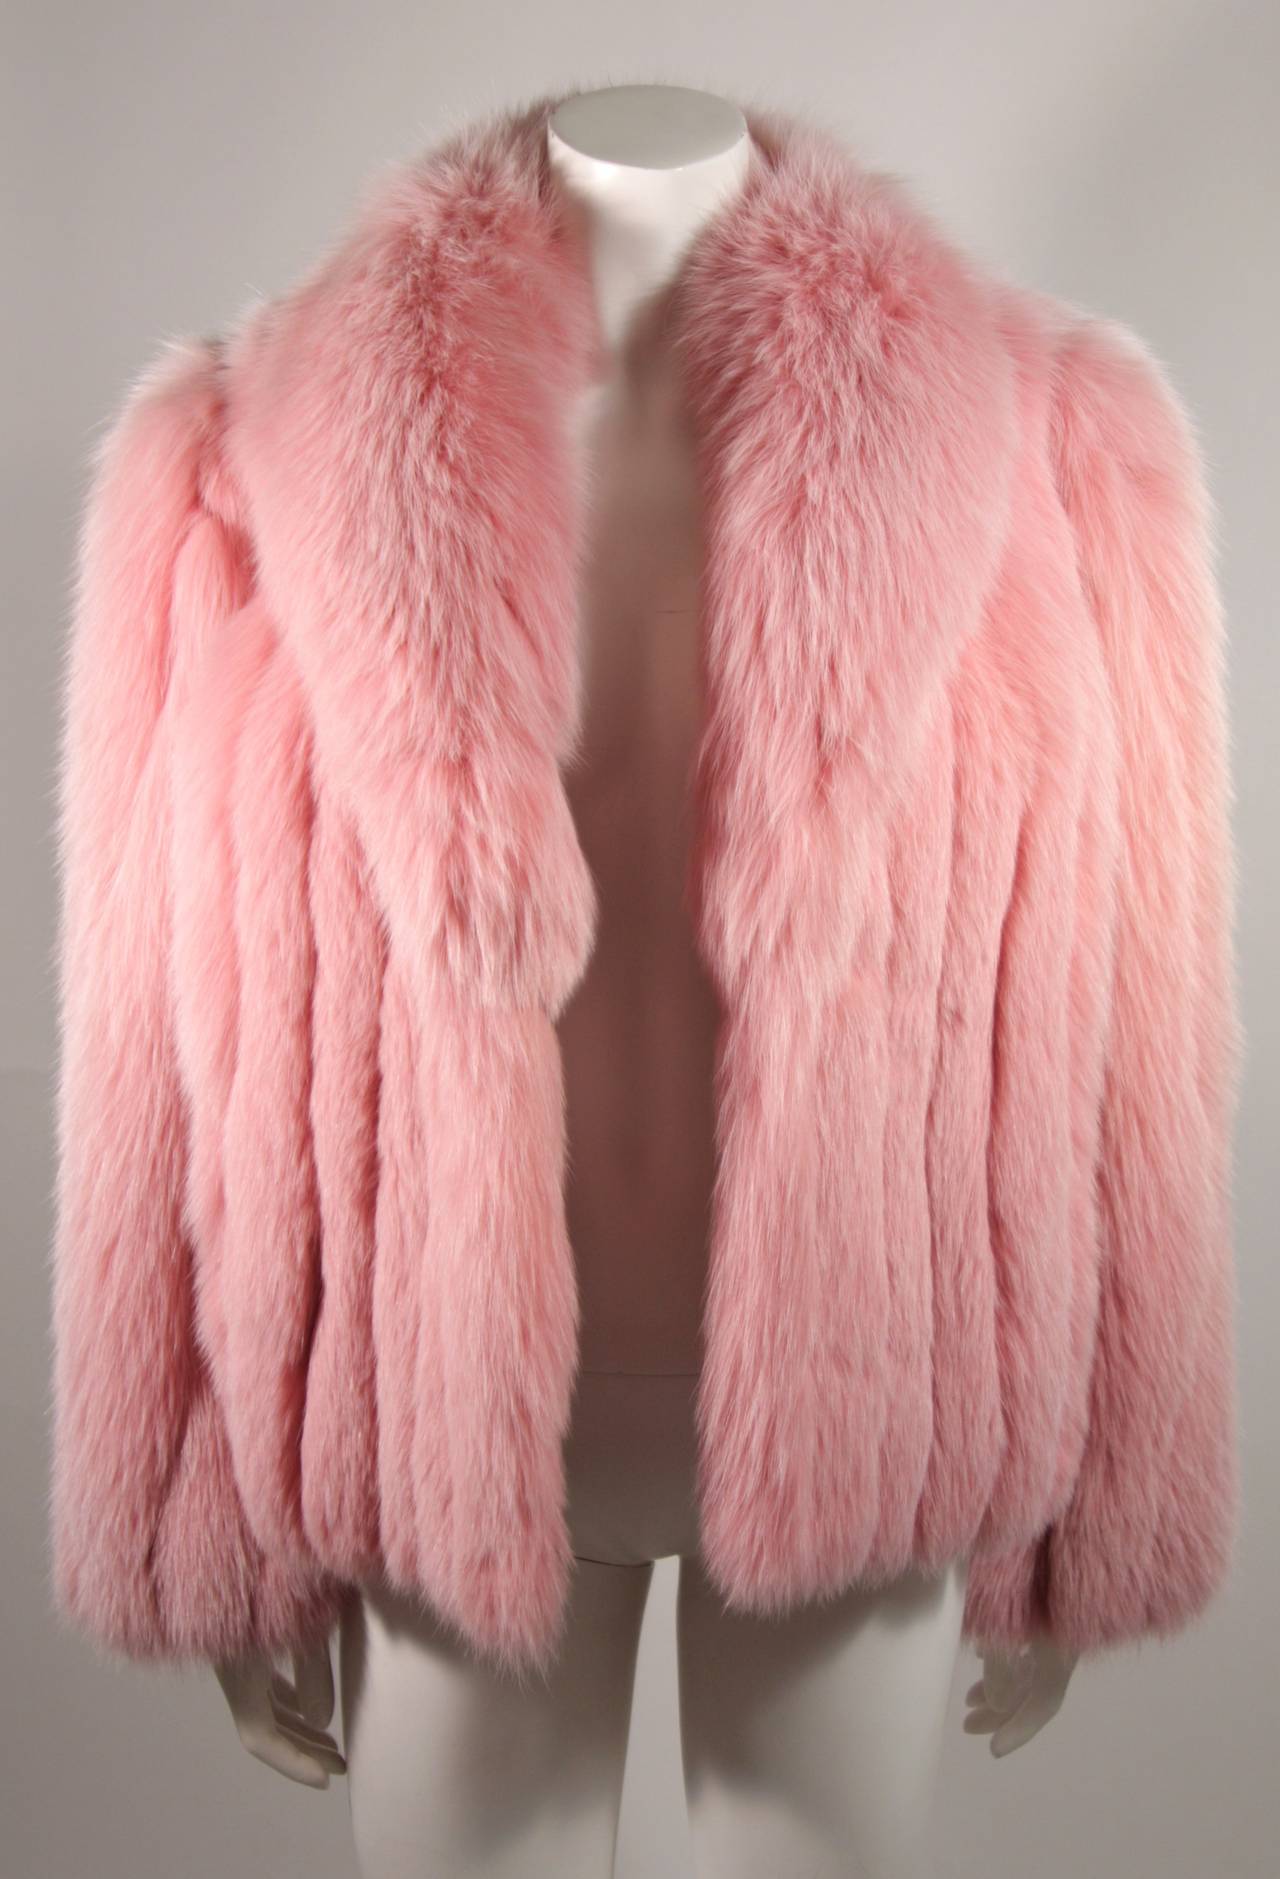 This is a fabulously lush fox fur coat. The coat is composed of a dense and supple pink dyed fox. The coat features two front side pockets. This coat is a delight. 

Measures (Approximately)
Length: 23.5